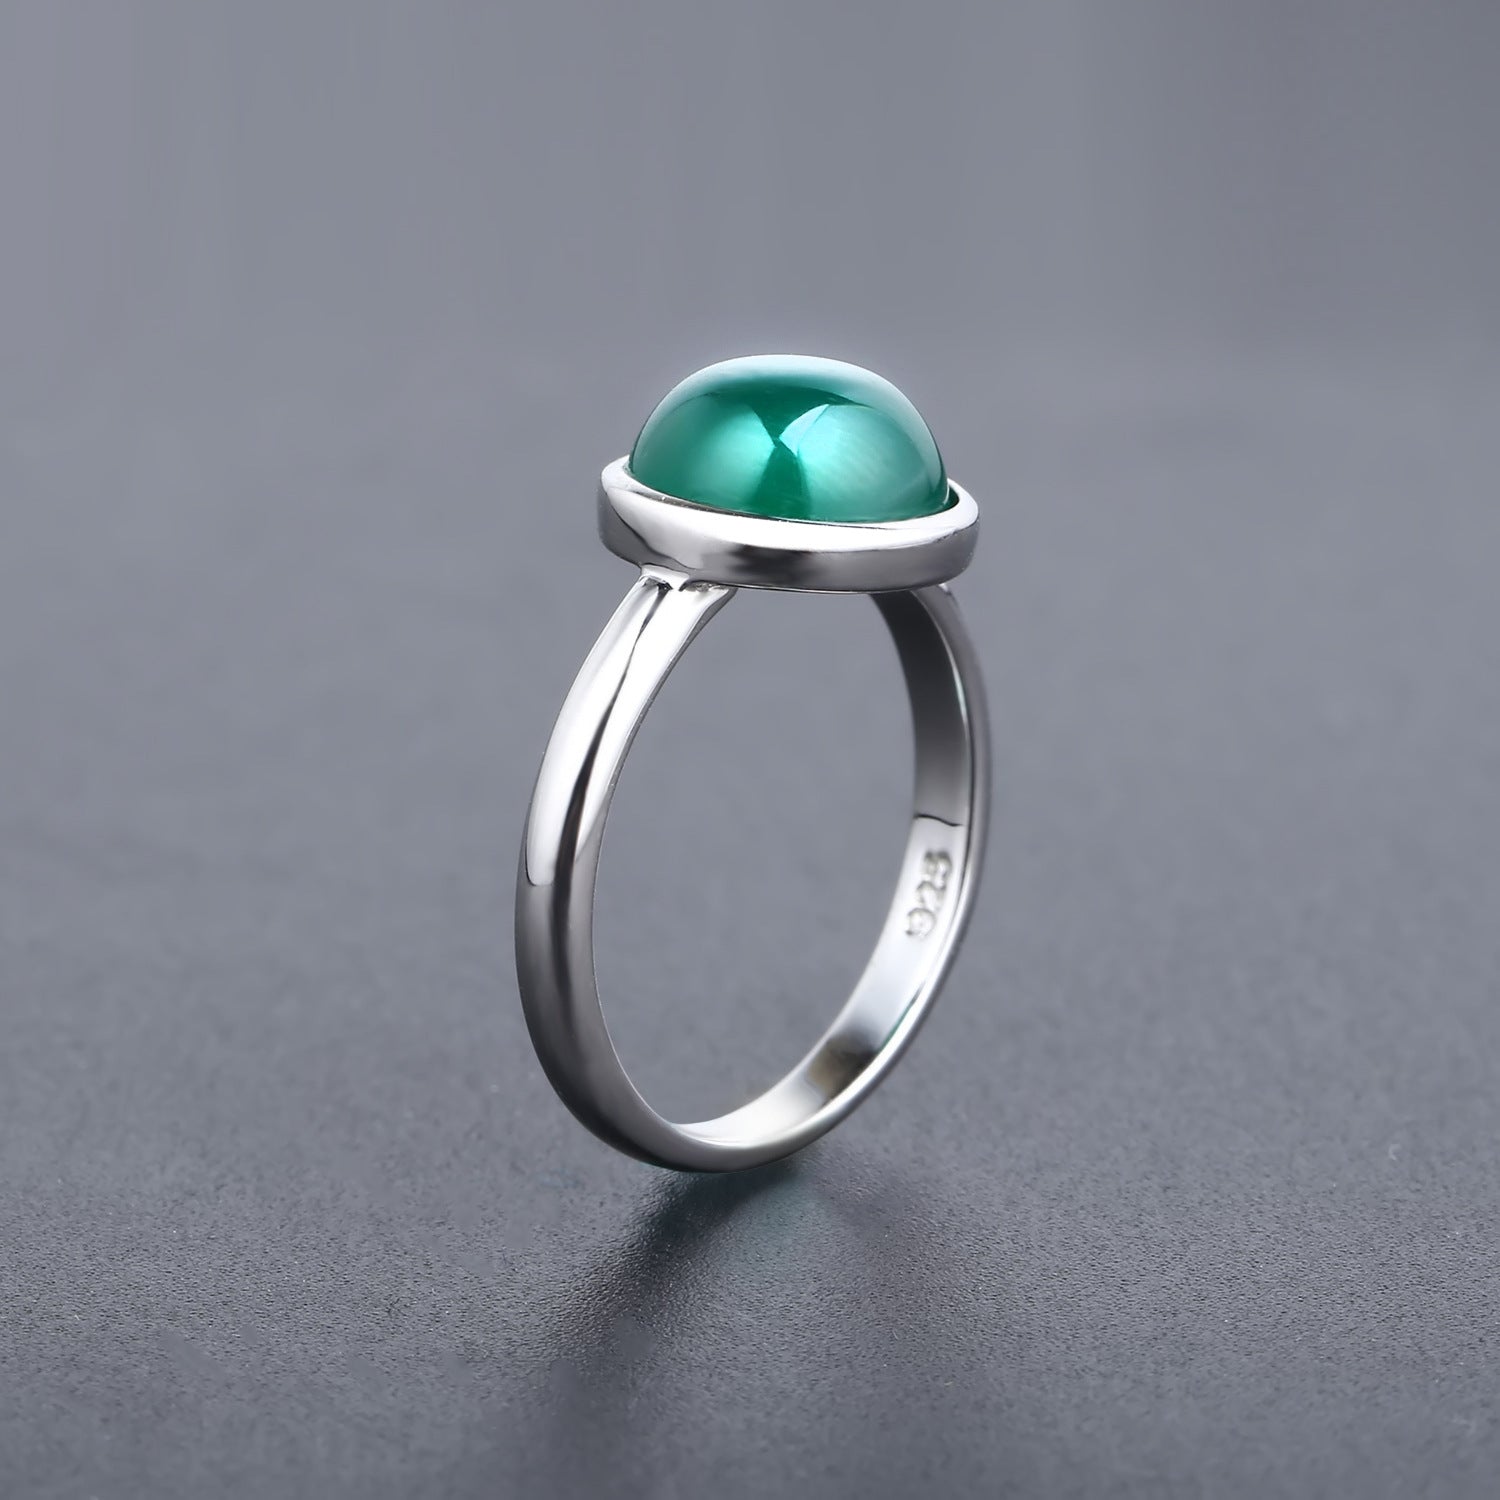 European Green Agate Solitaire Oval Shape Silver Ring for Women